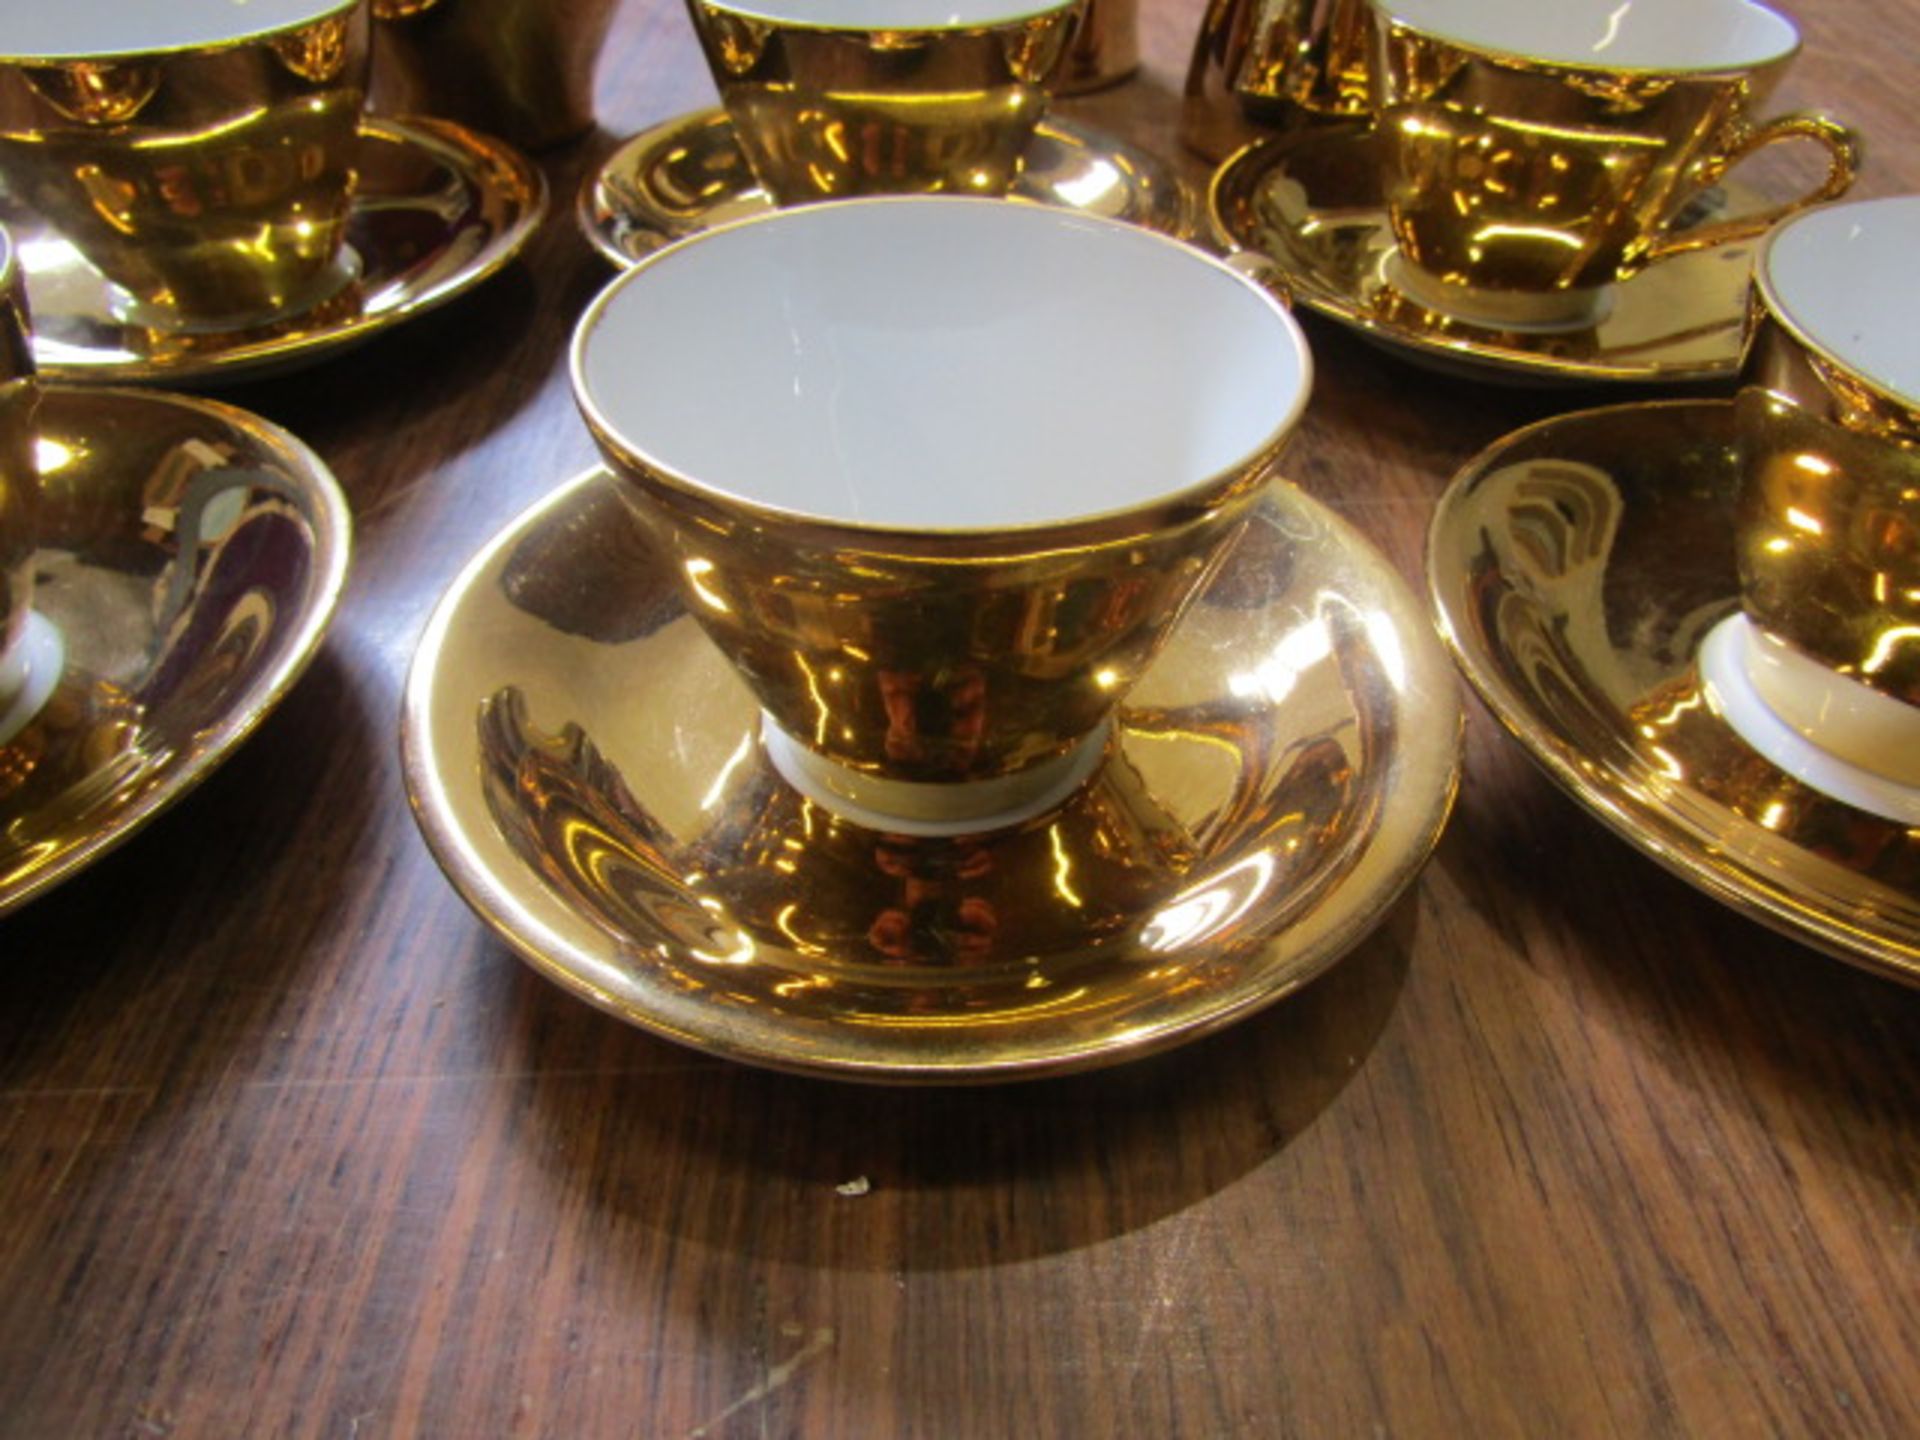 A German gold coloured coffee set for 6 - Image 2 of 3